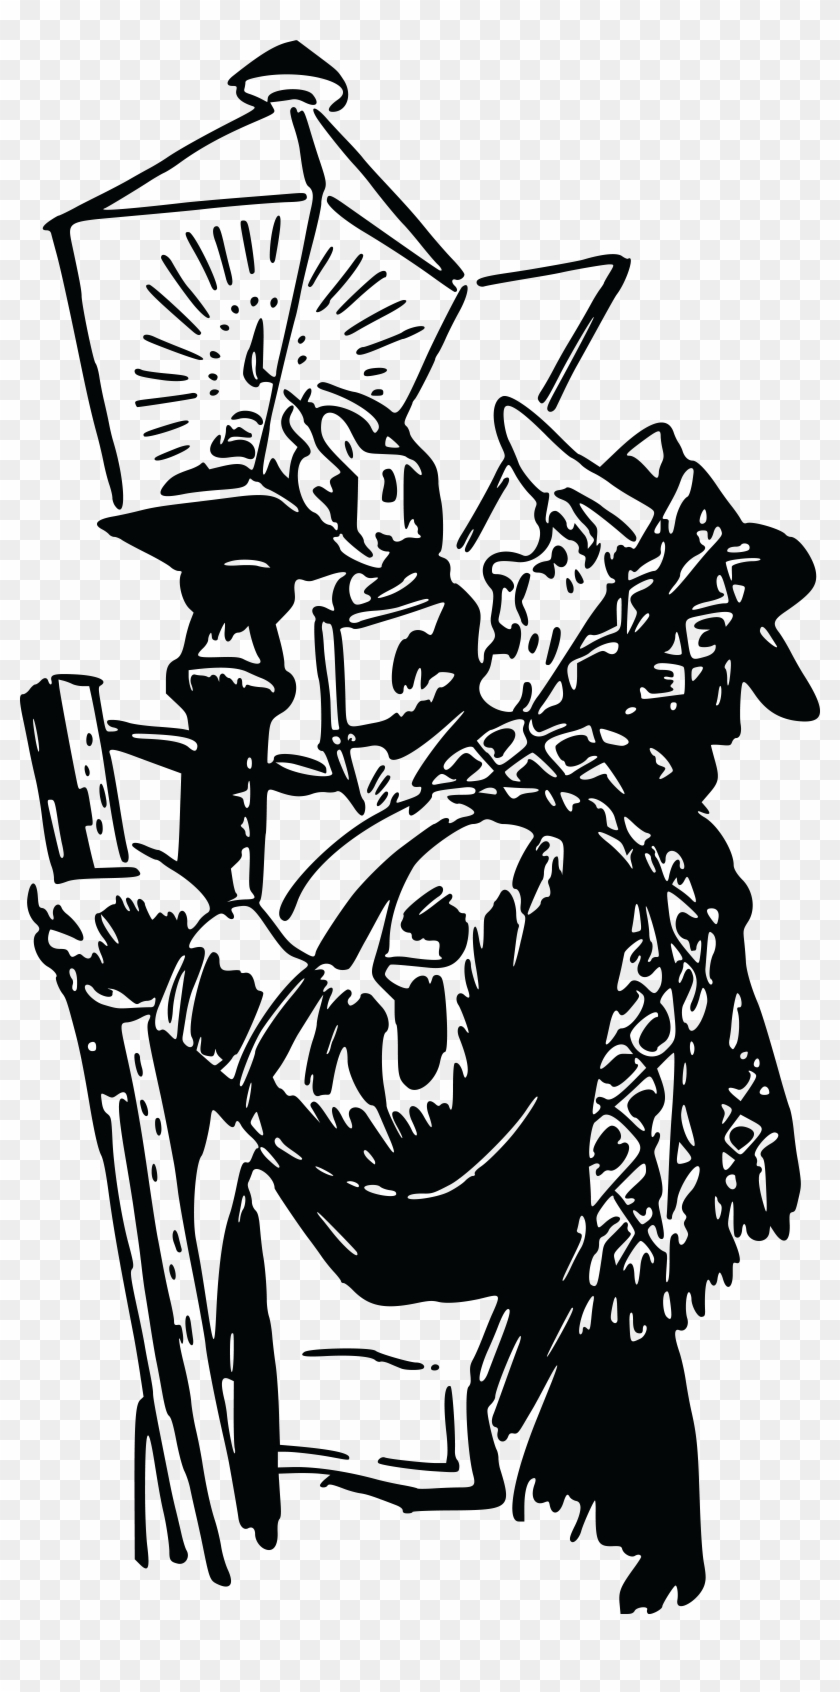 Free Clipart Of A Man Lighting A Gas Lamp - Lighting #166545